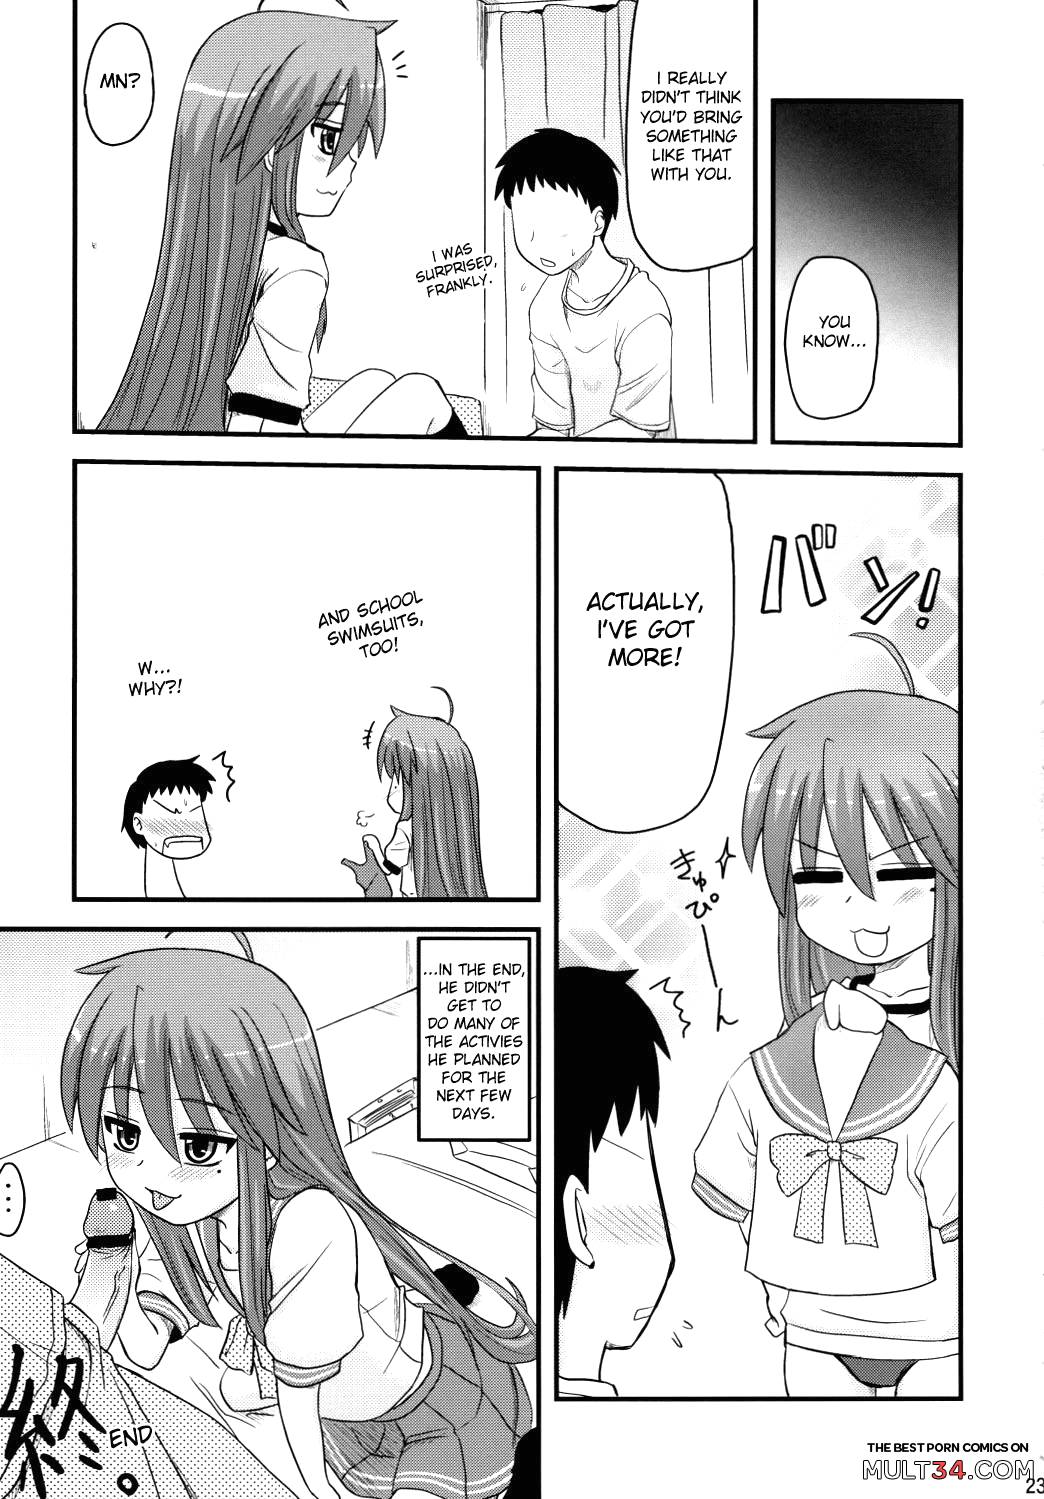 Konata and Oh-zu 4 people each and every one + 1 page 19